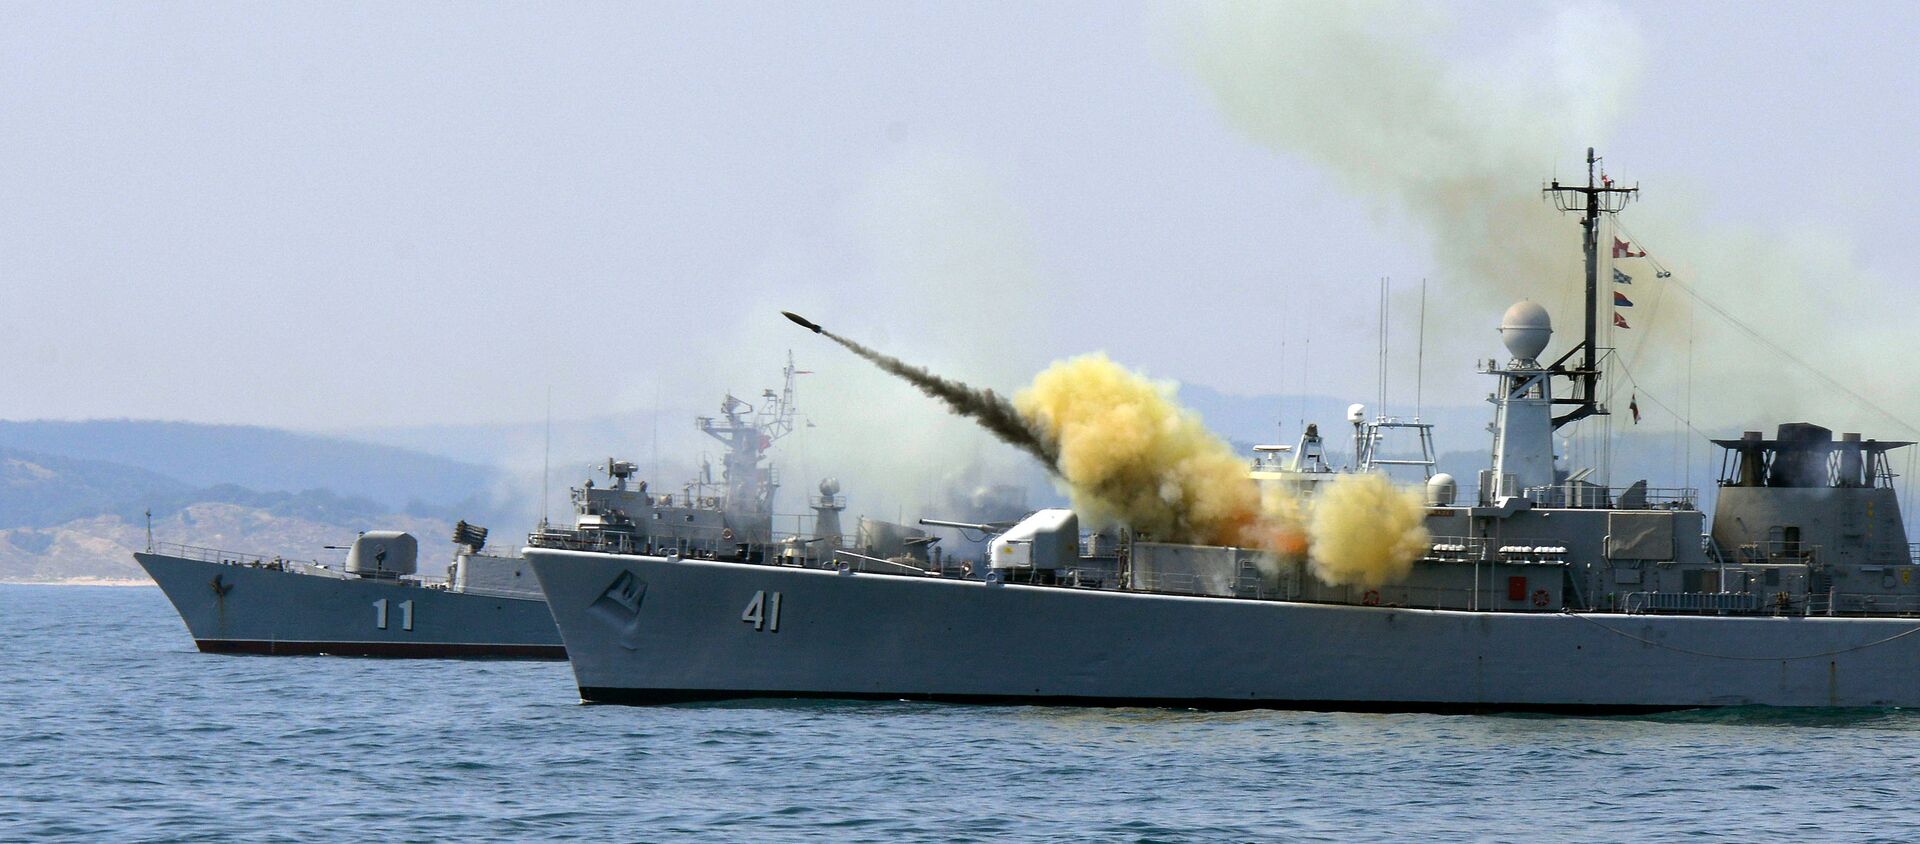 An anti-submarine rocket blasts off a rocket launcher from the Bulgarian navy frigate Drazki during the BREEZE 2014 military drill in the Black Sea - Sputnik Moldova, 1920, 19.08.2020